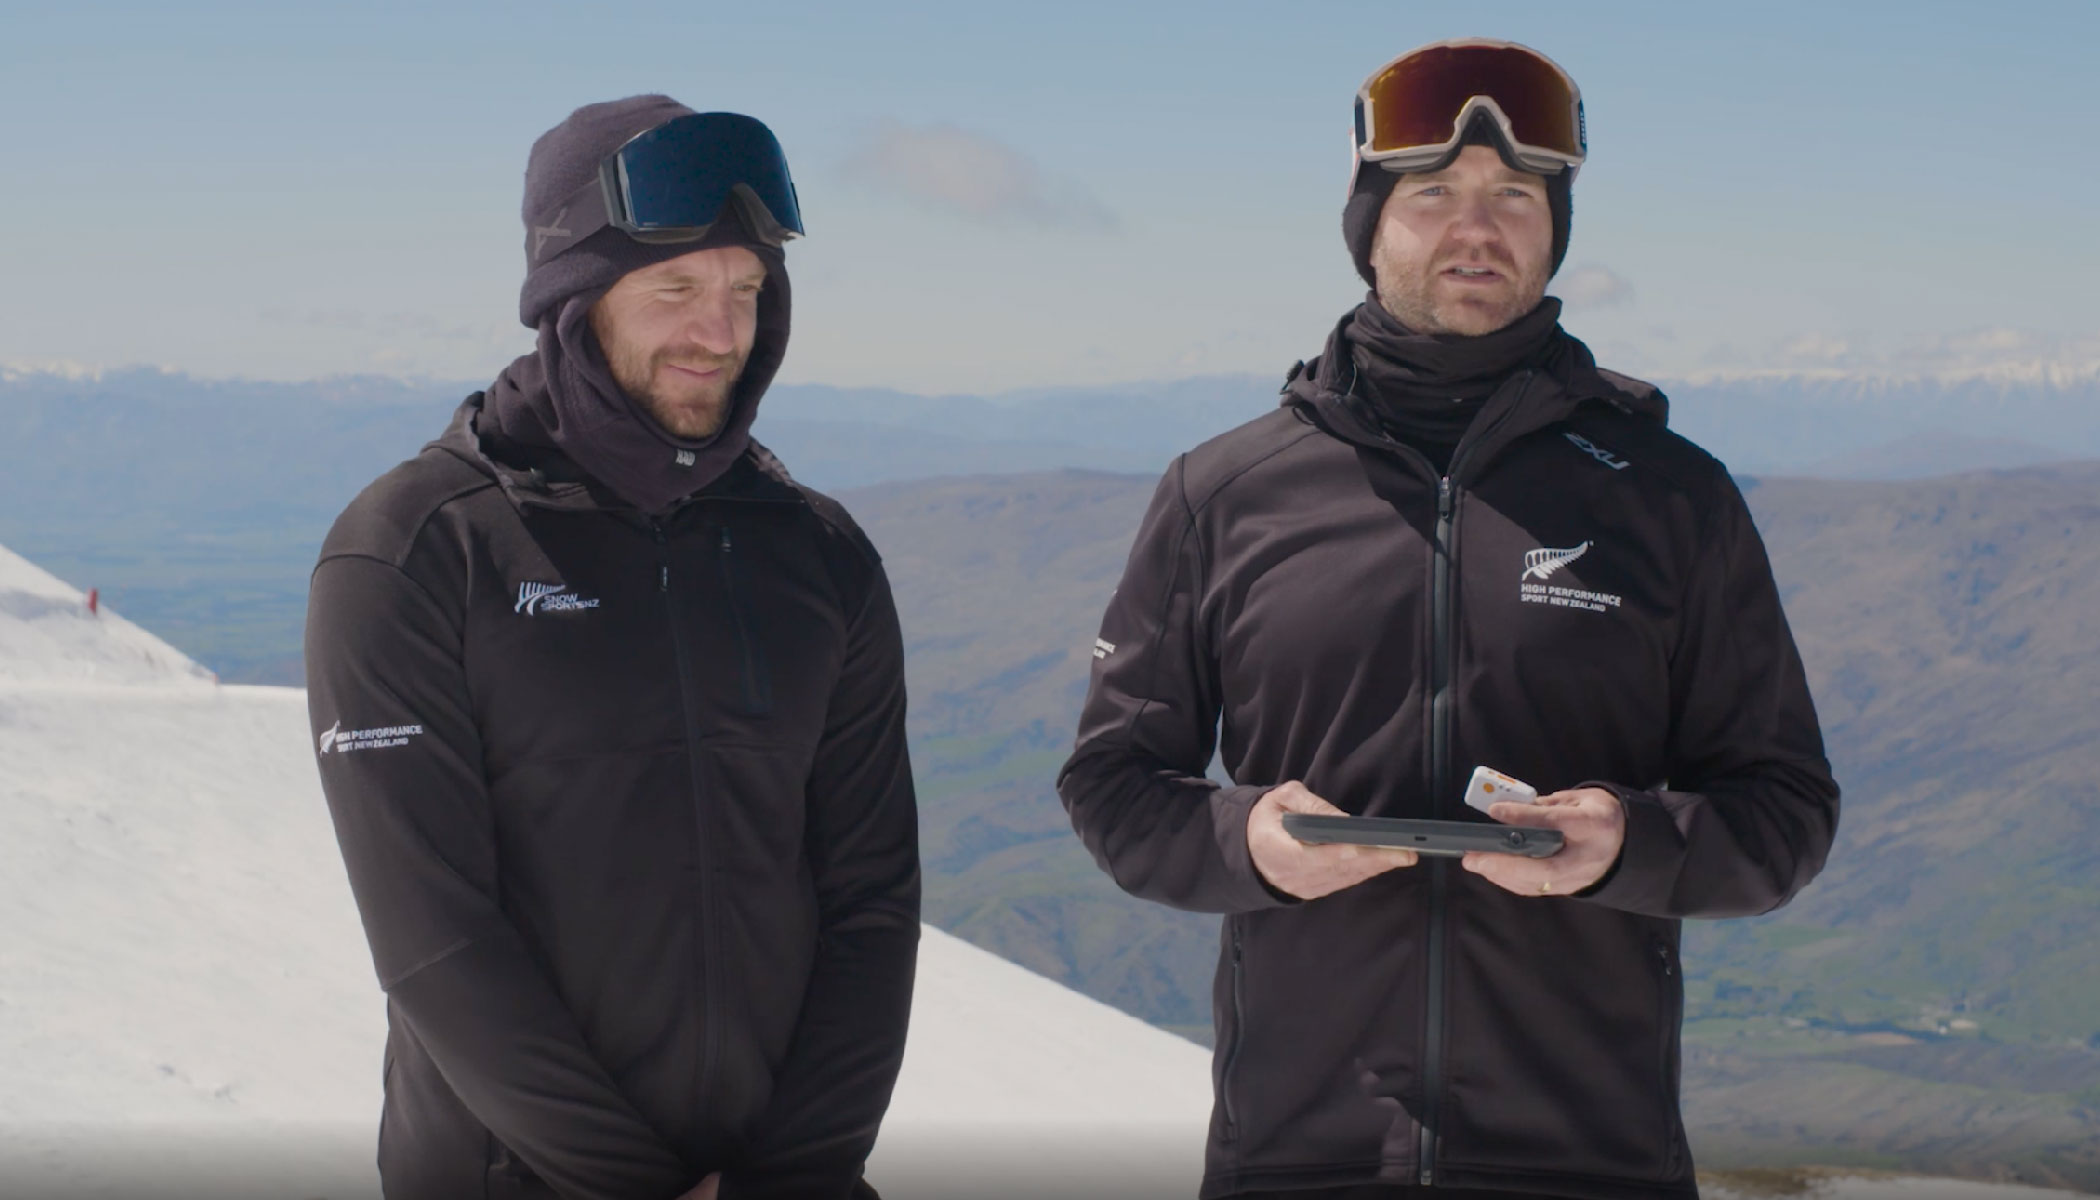 Sean and Cameron on a ski slope holding wearable tech